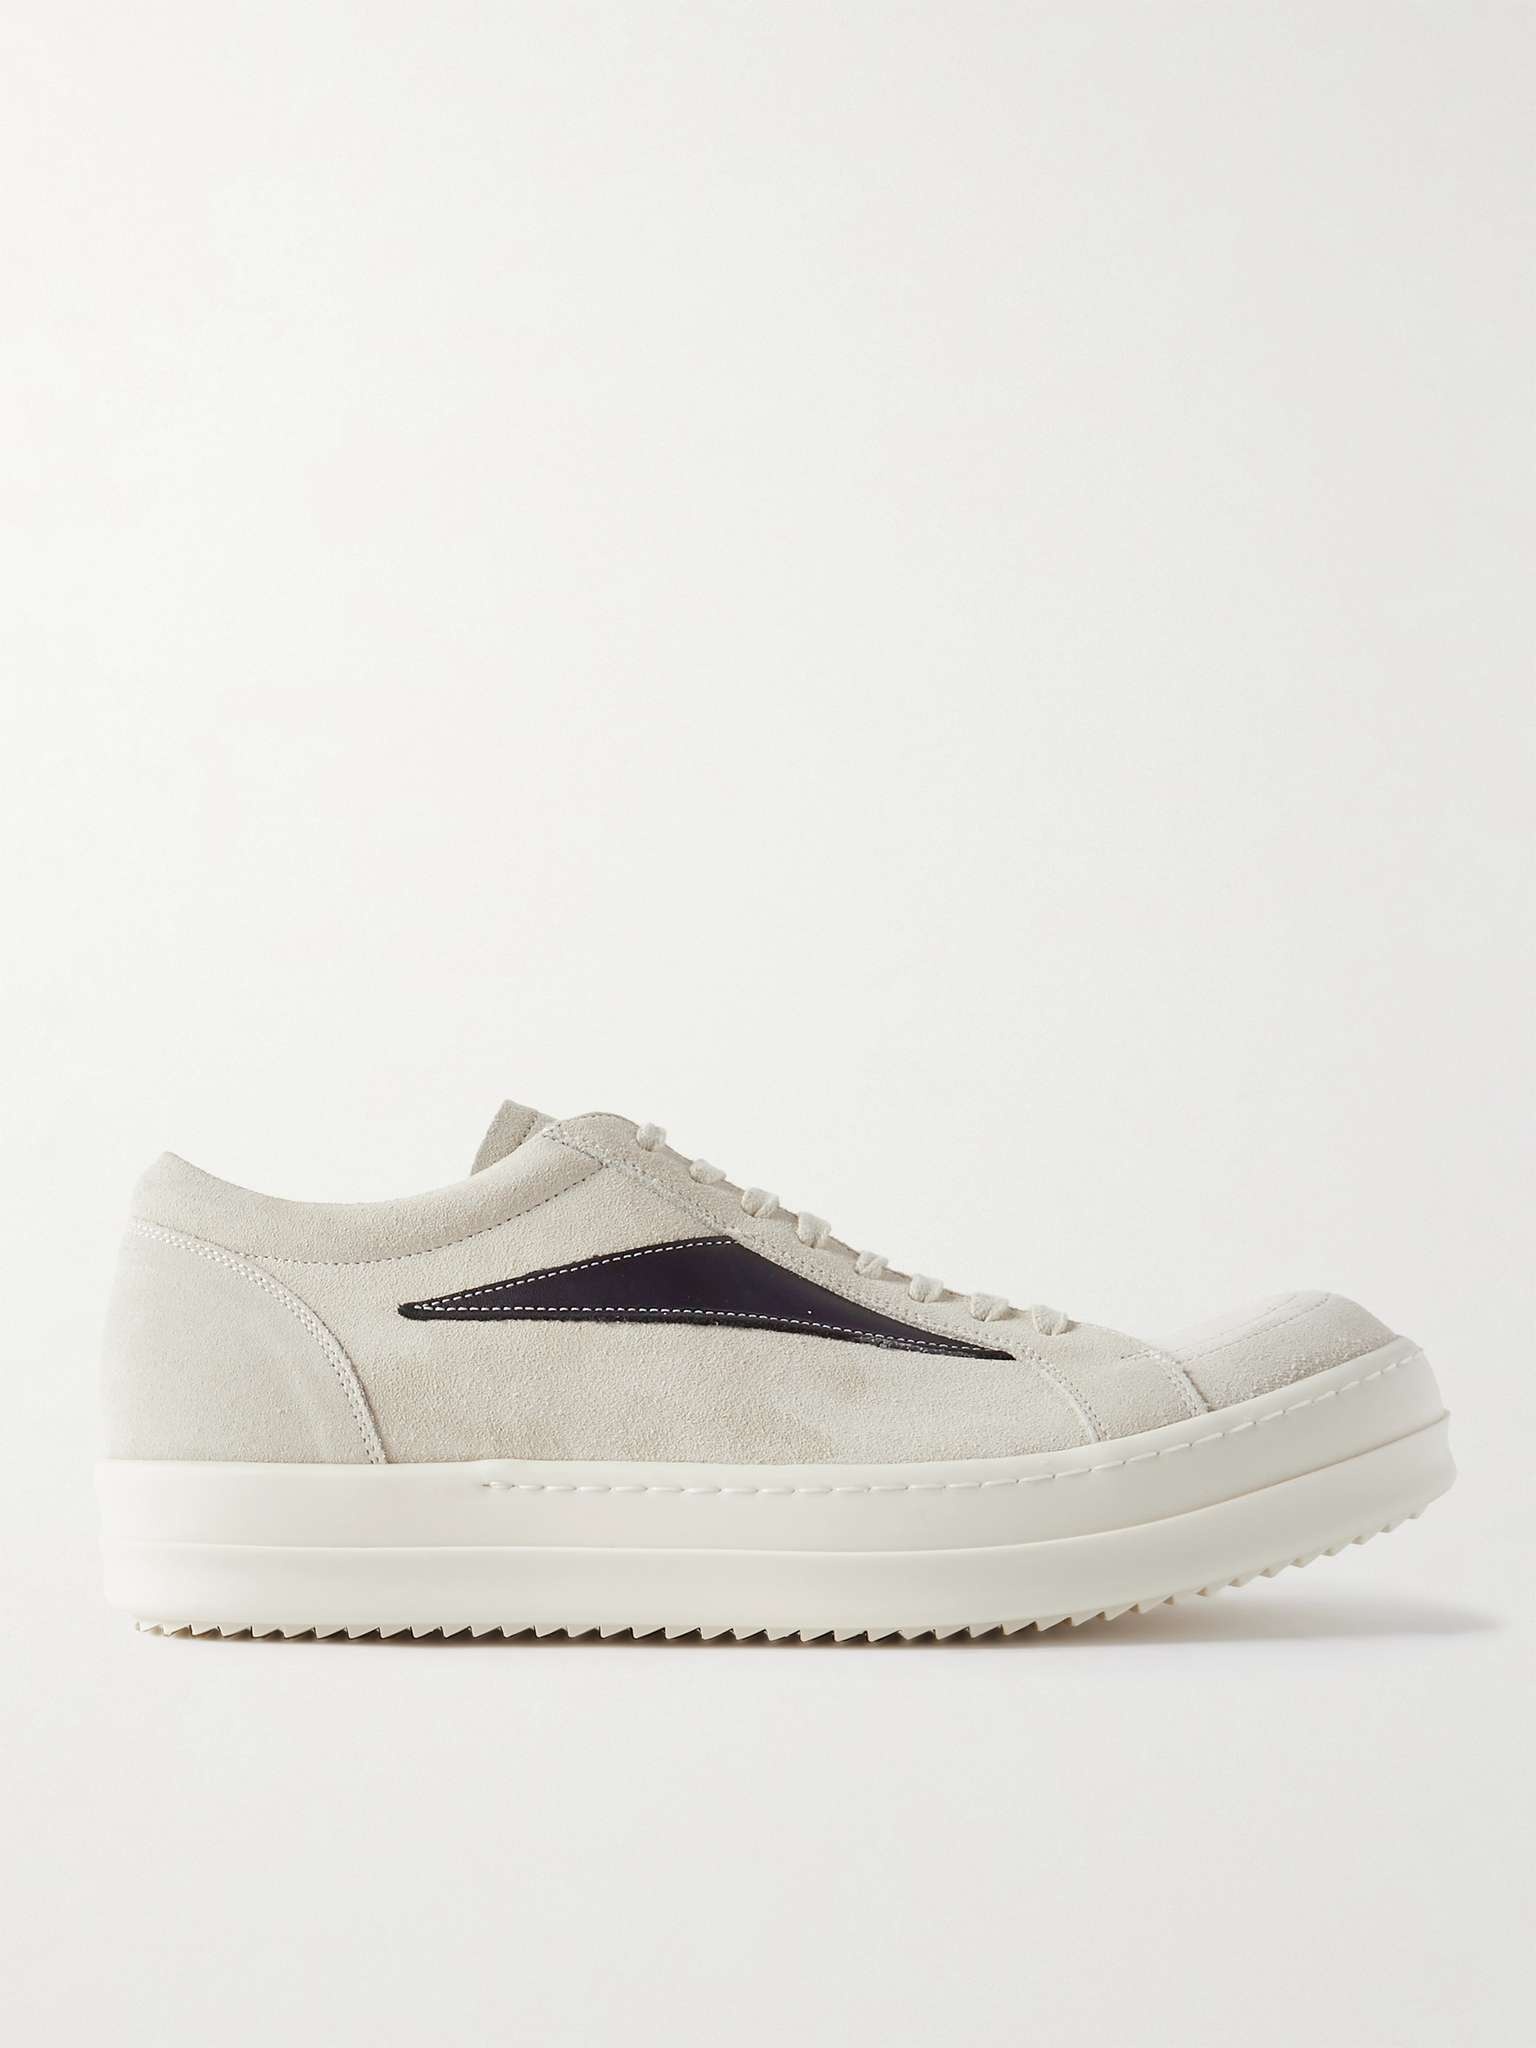 Vintage Leather-Trimmed Suede Sneakers - 1